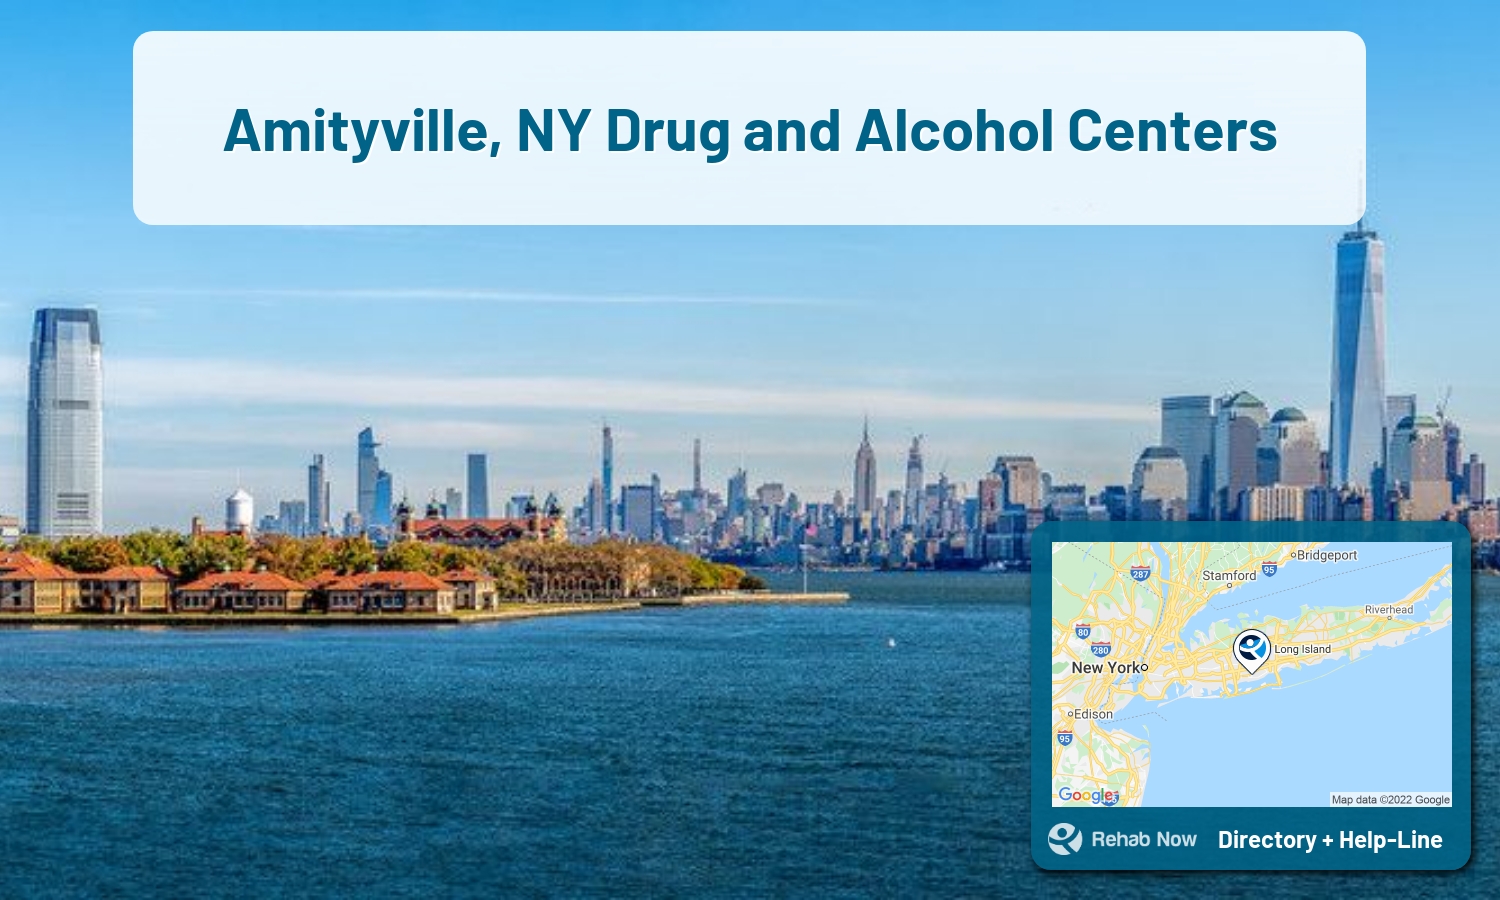 Amityville, NY Treatment Centers. Find drug rehab in Amityville, New York, or detox and treatment programs. Get the right help now!